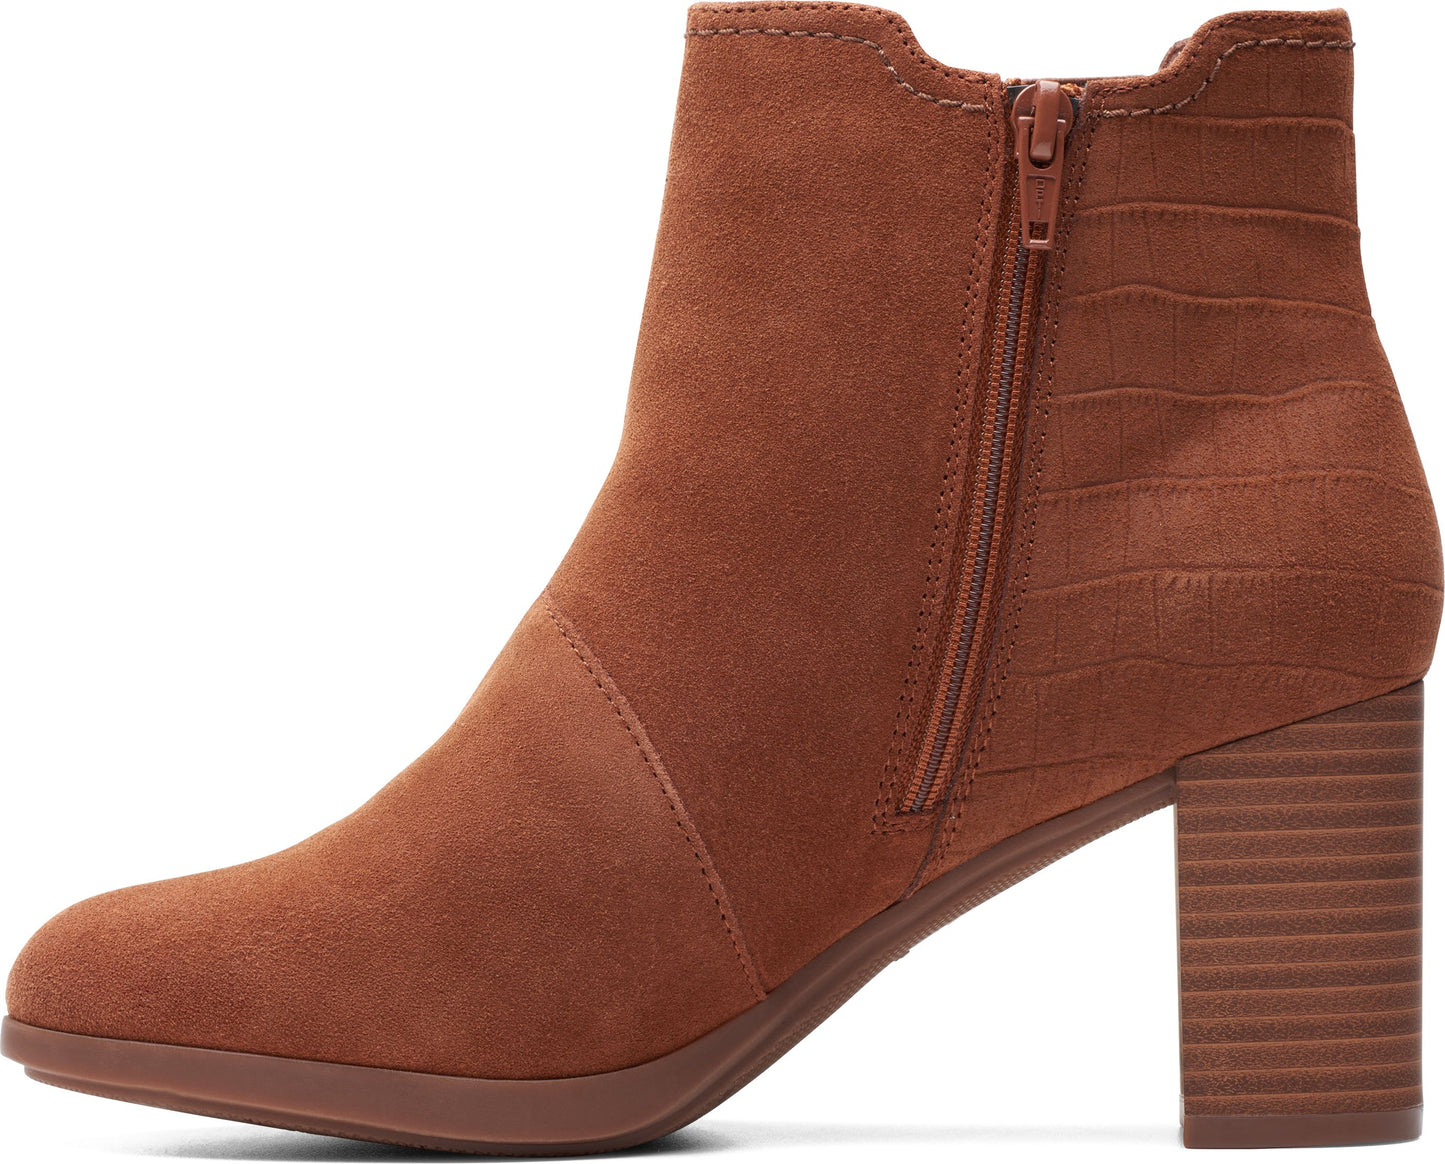 Clarks Boots Bayla Rose Tan Suede